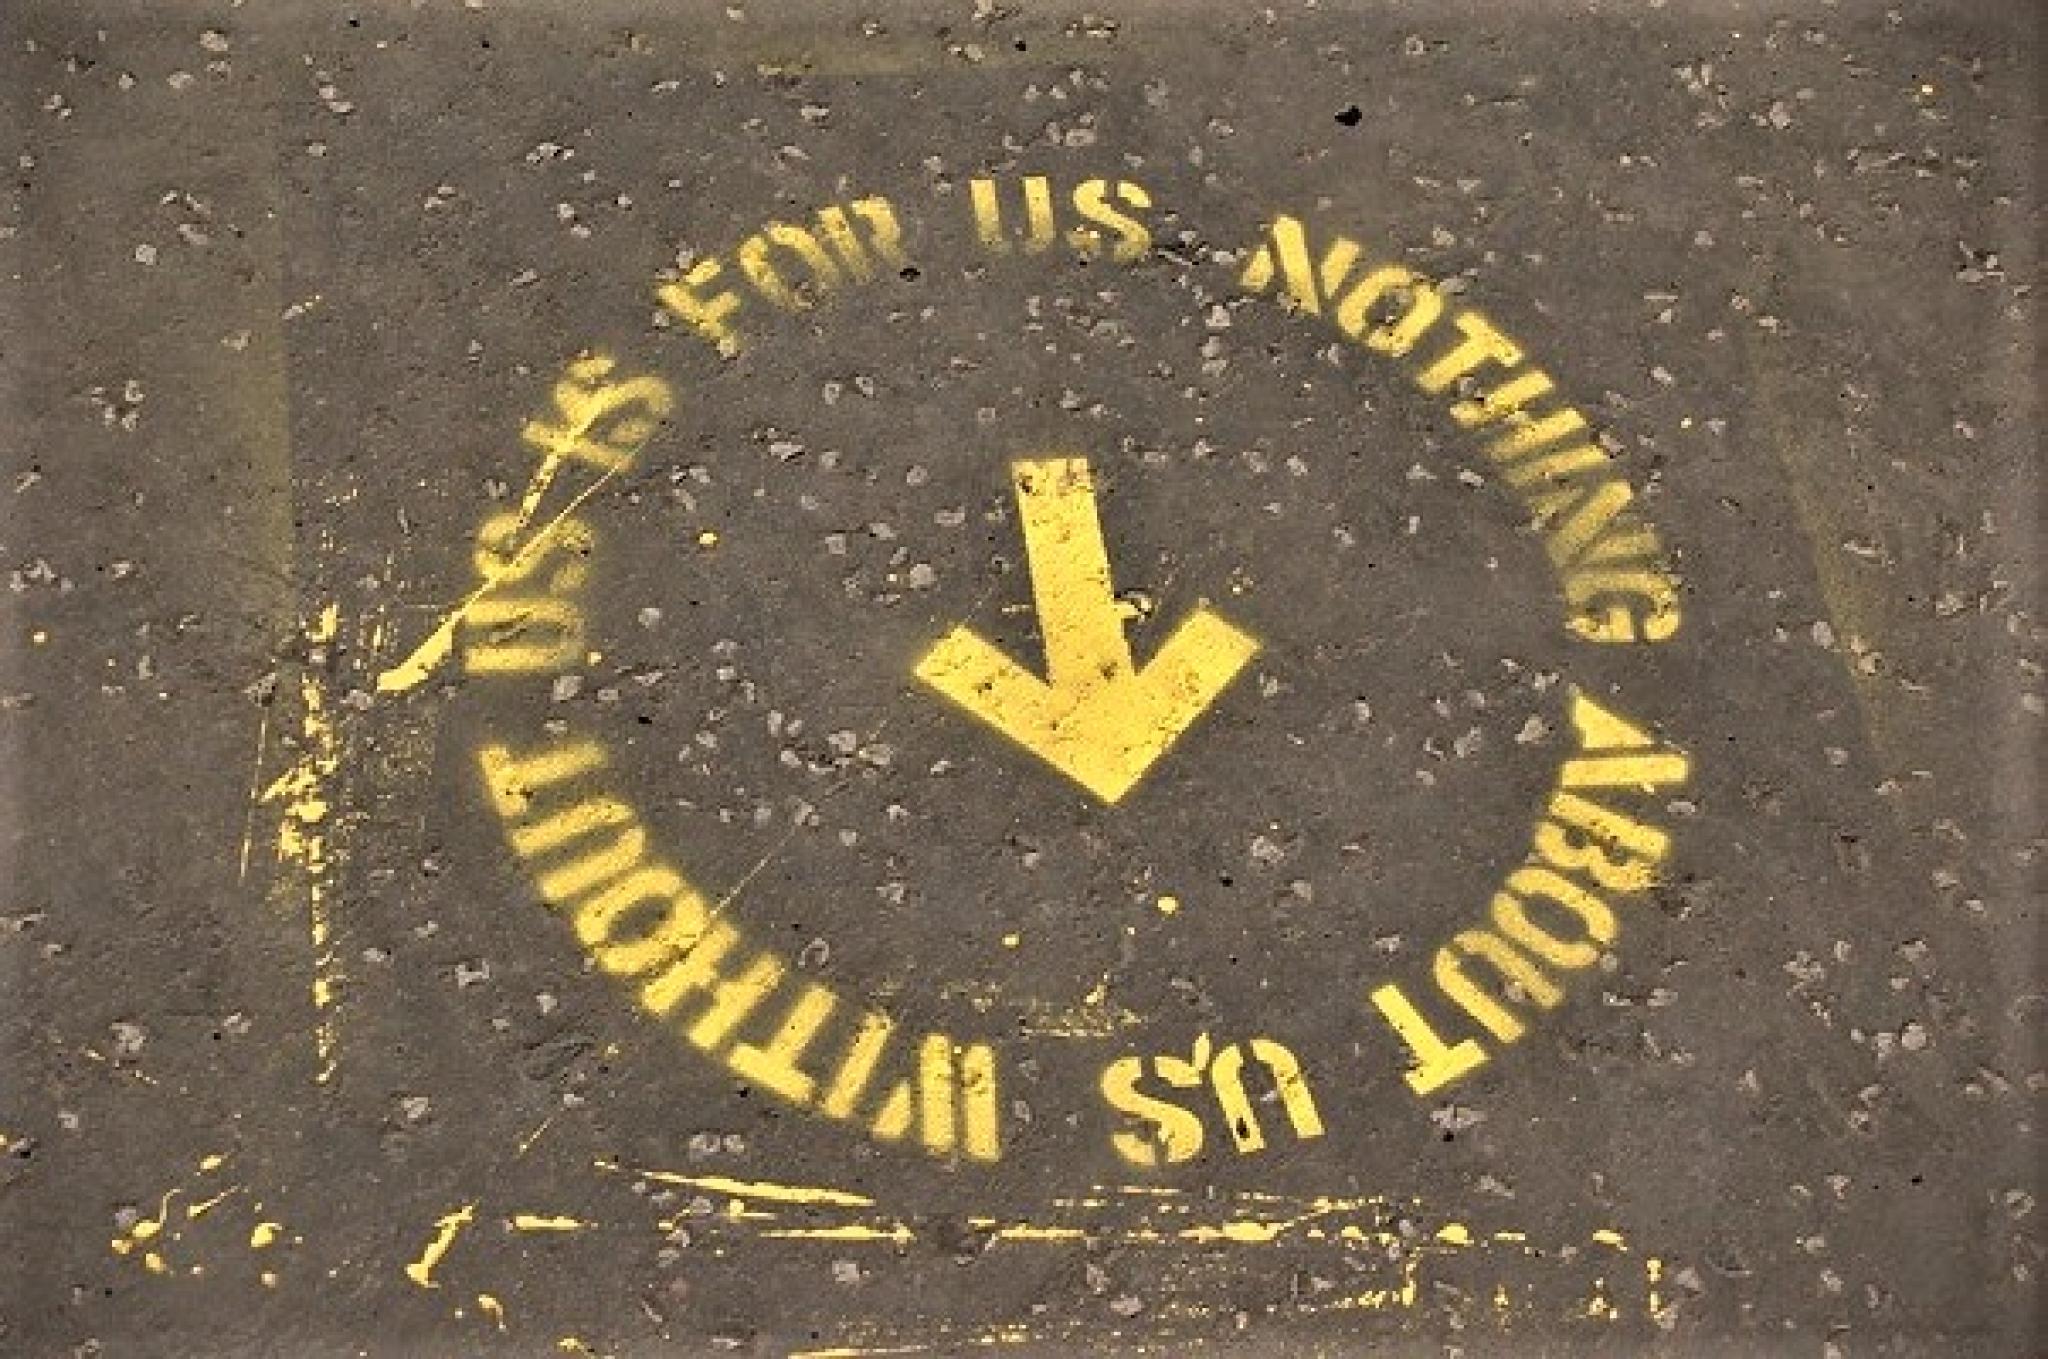 Image of street art stencil: “Nothing about us without us is for us” from public art event of the same name in Glasgow, Scotland, by t s Beall and many others from https://flic.kr/p/dv5FgK, used under CC BY-NC-SA 2.0 DEED licence